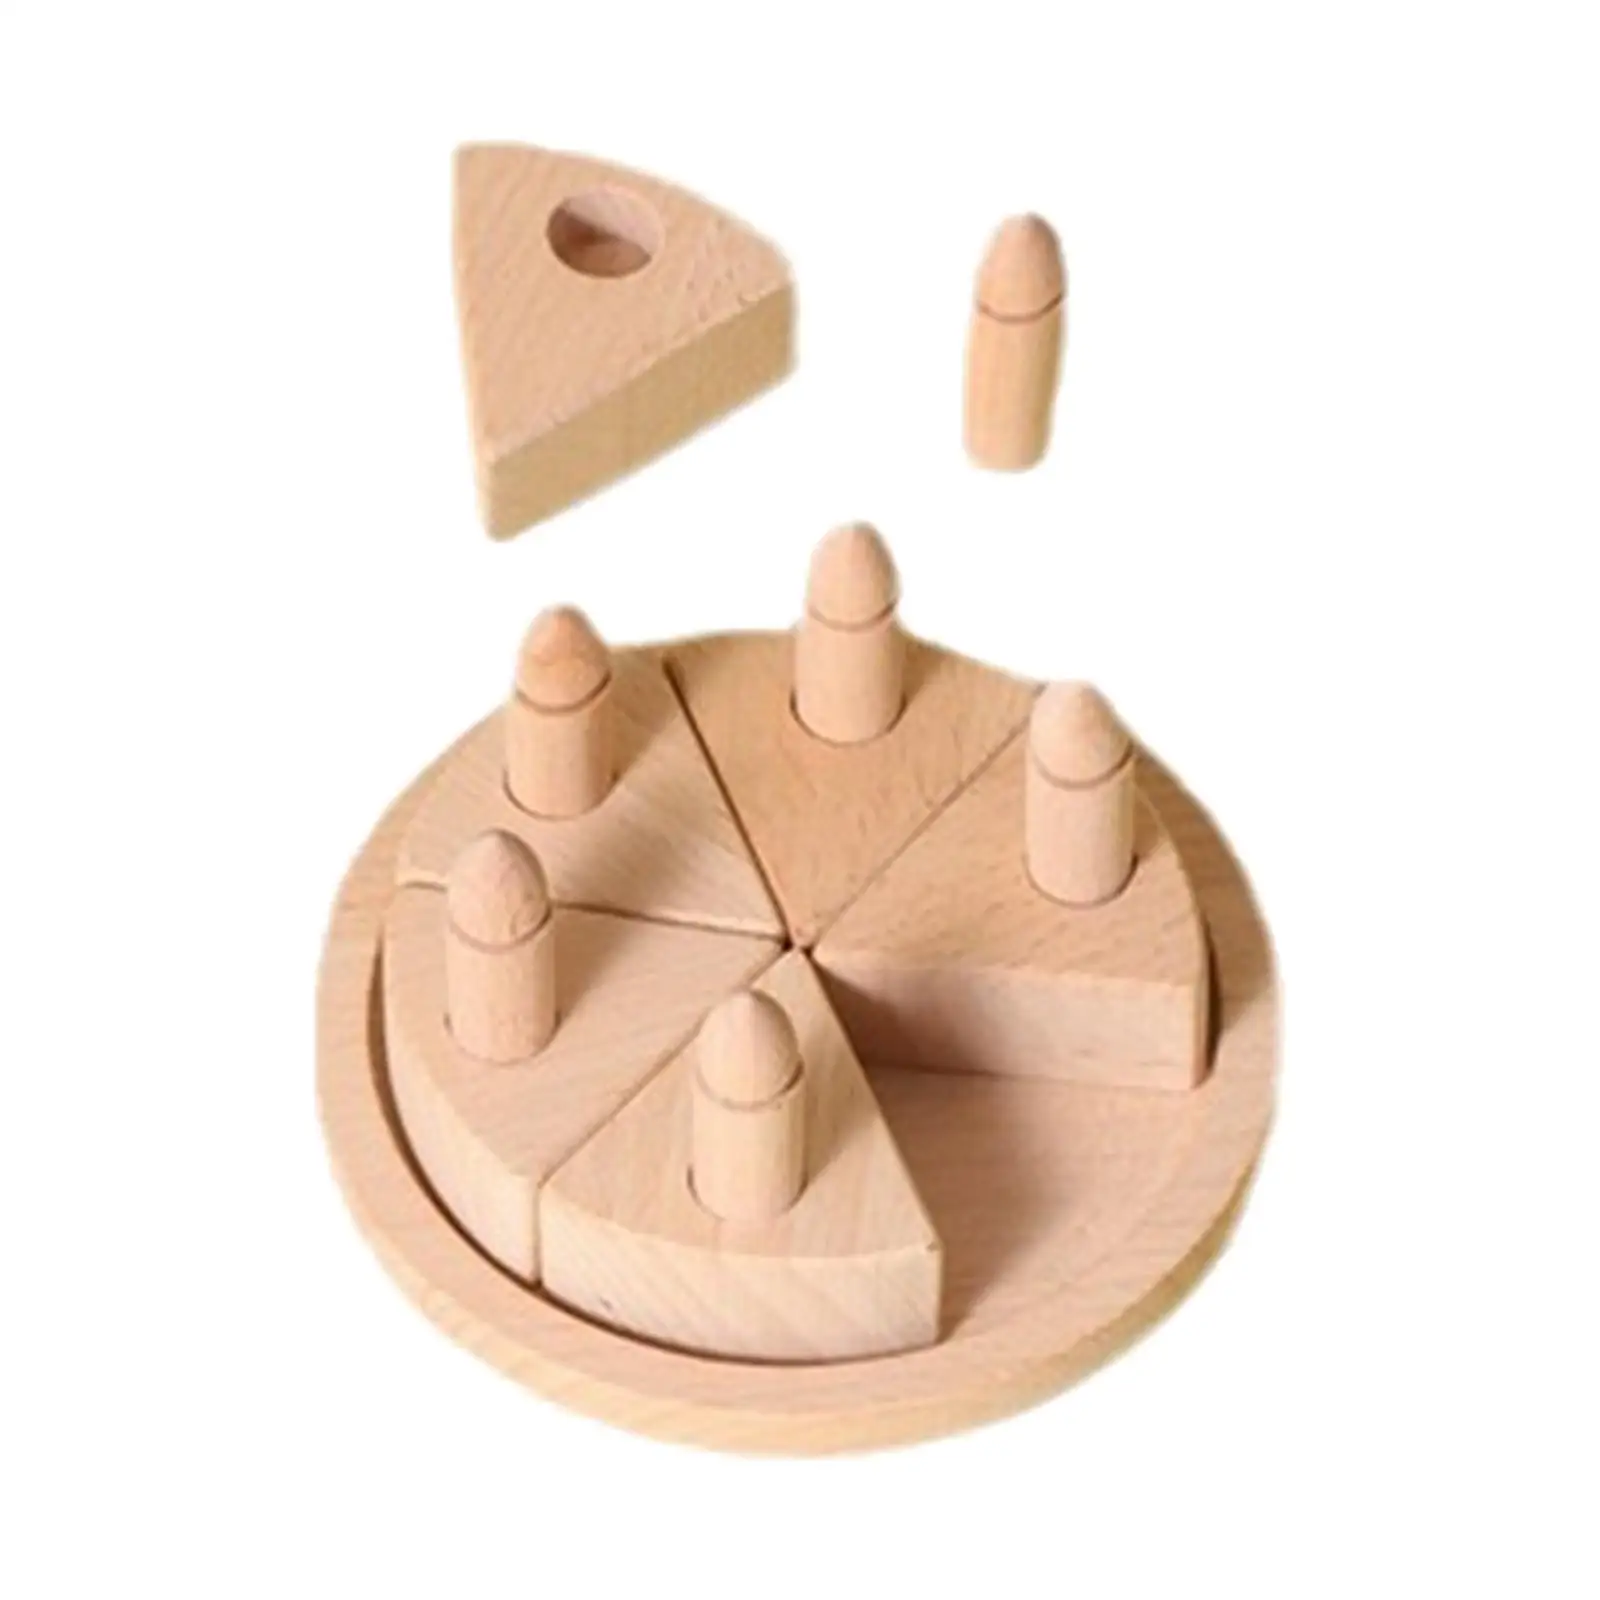 Wooden Cutting Birthday Cake Toys Birthday Fake Cake Toy Learning Educational Toddlers Cake Set for Children Birthday Gifts